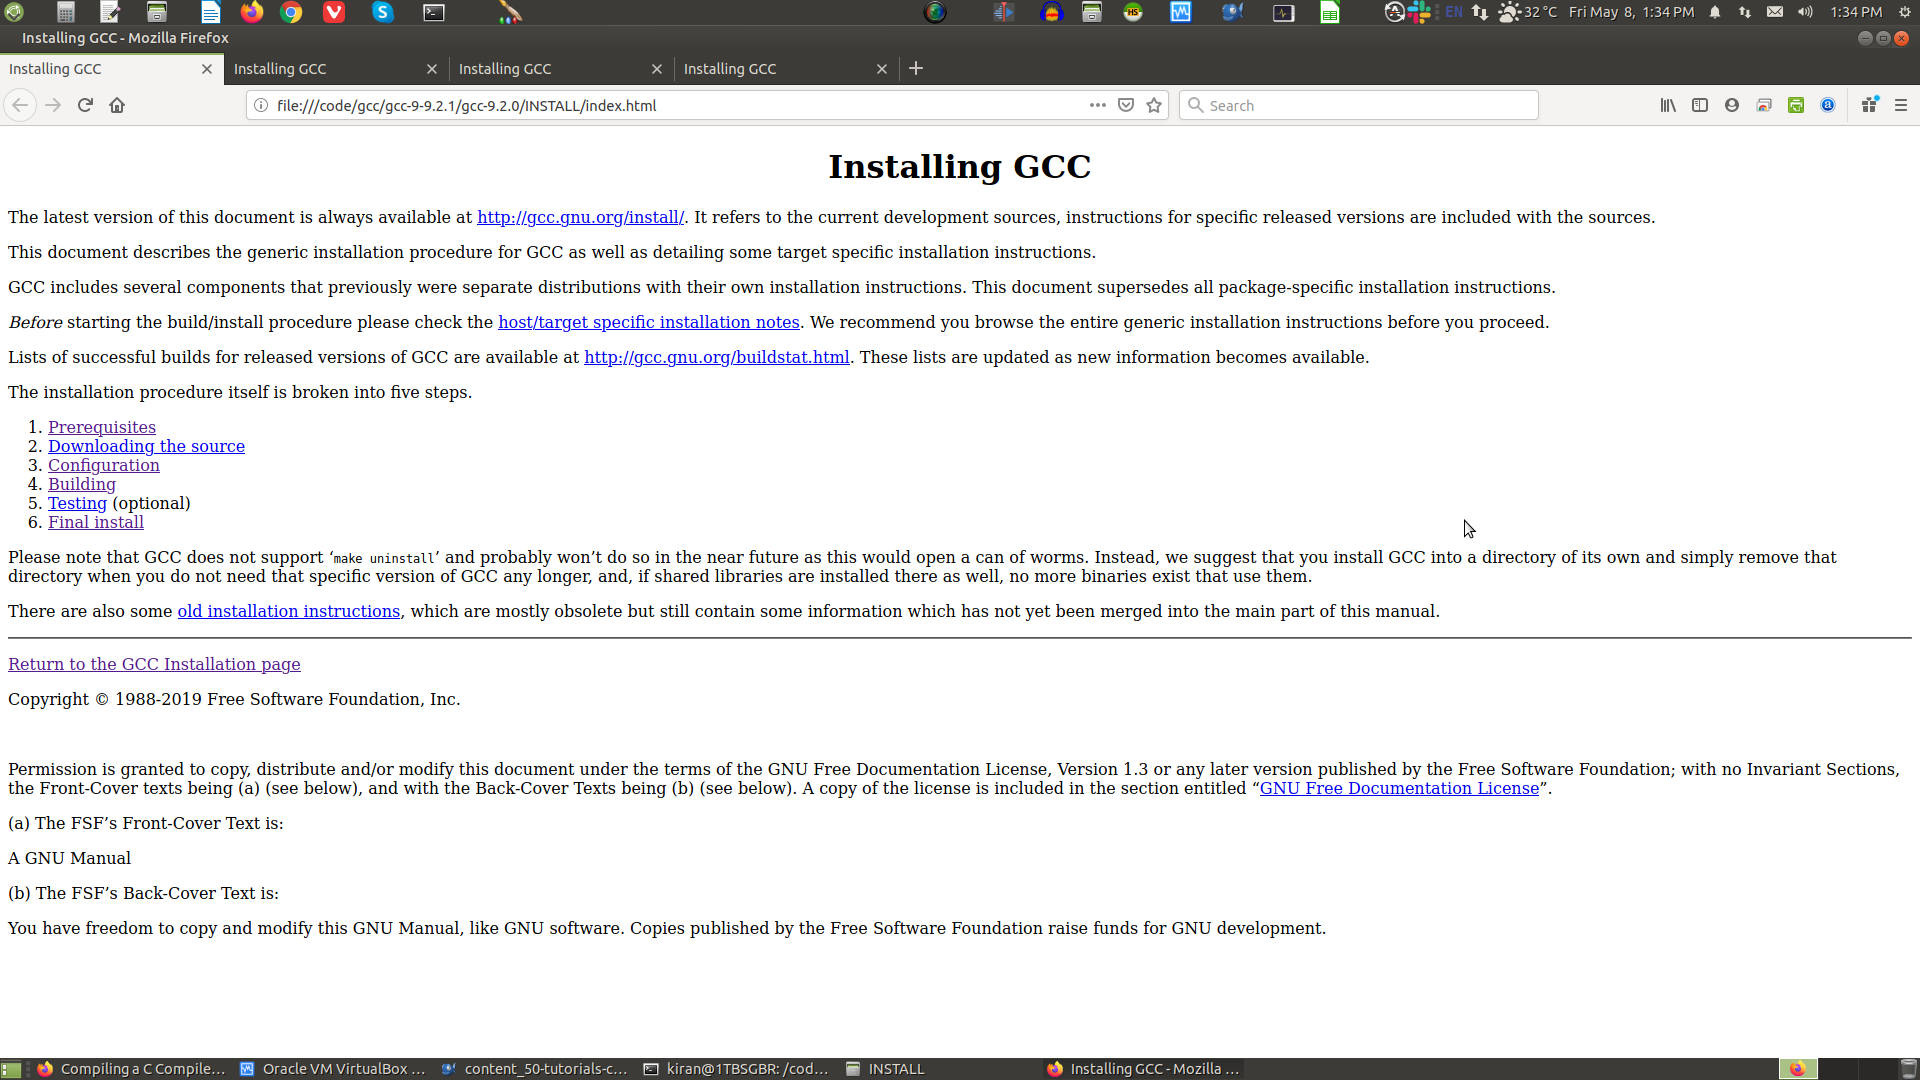 gcc HTML Installation Guide page 1